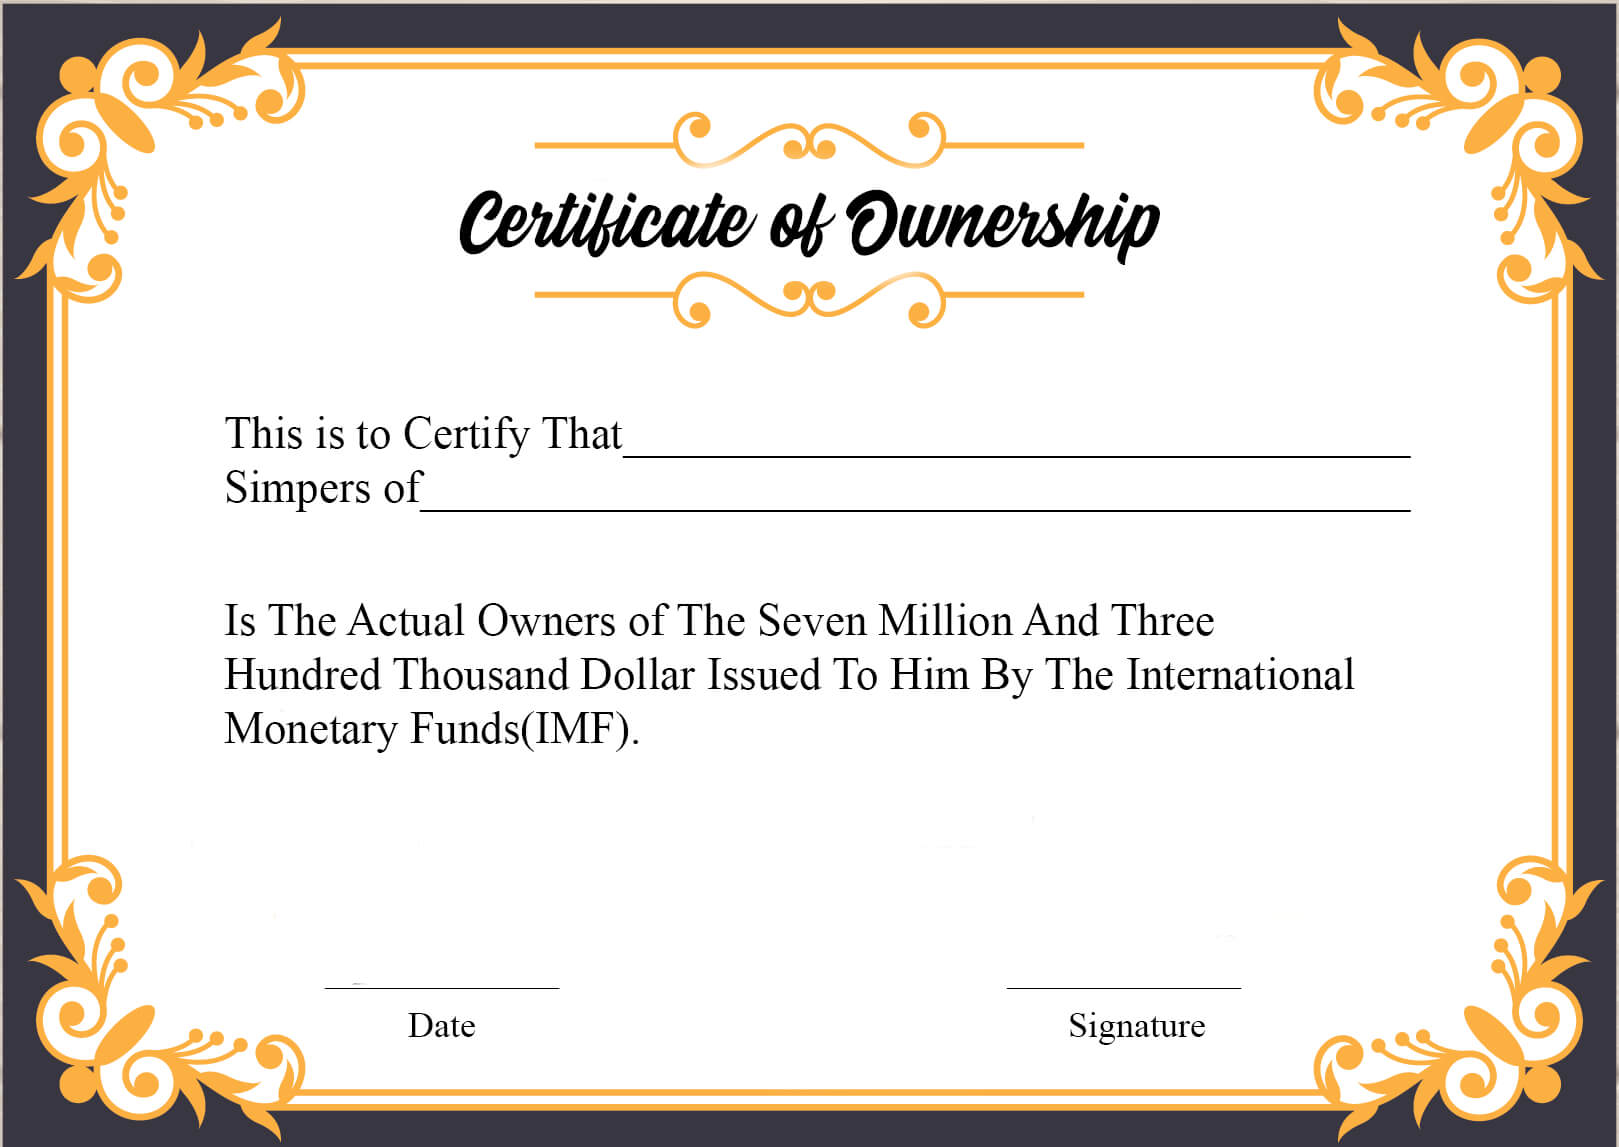 ❤️5+ Free Sample Of Certificate Of Ownership Form Template❤️ For Ownership Certificate Template